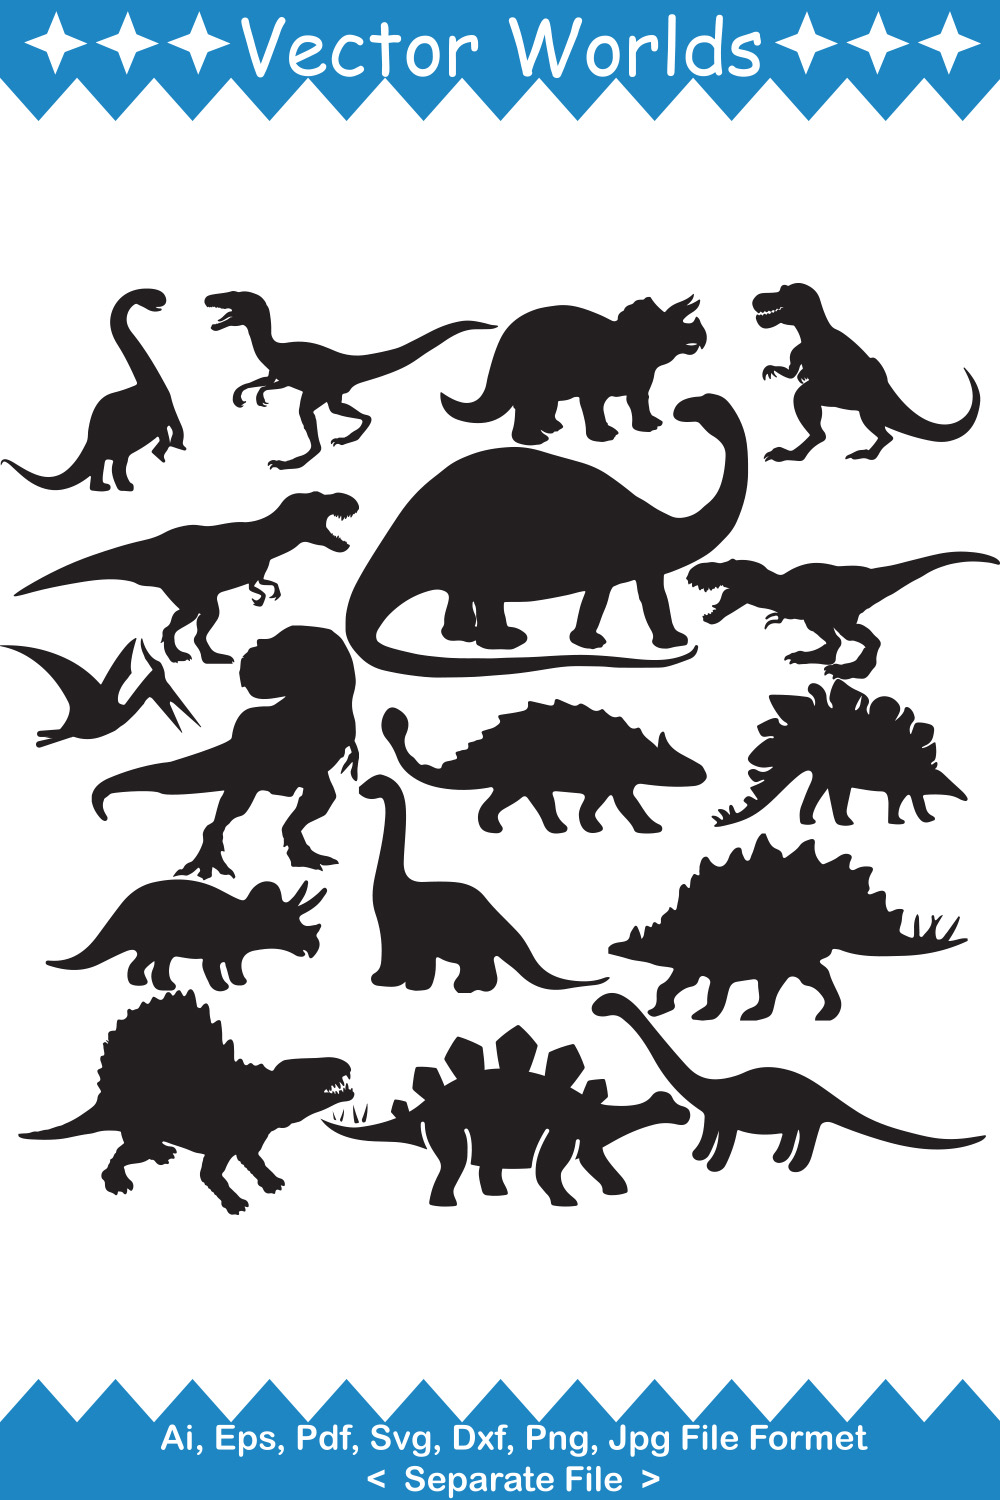 Set of silhouettes of different dinosaurs.